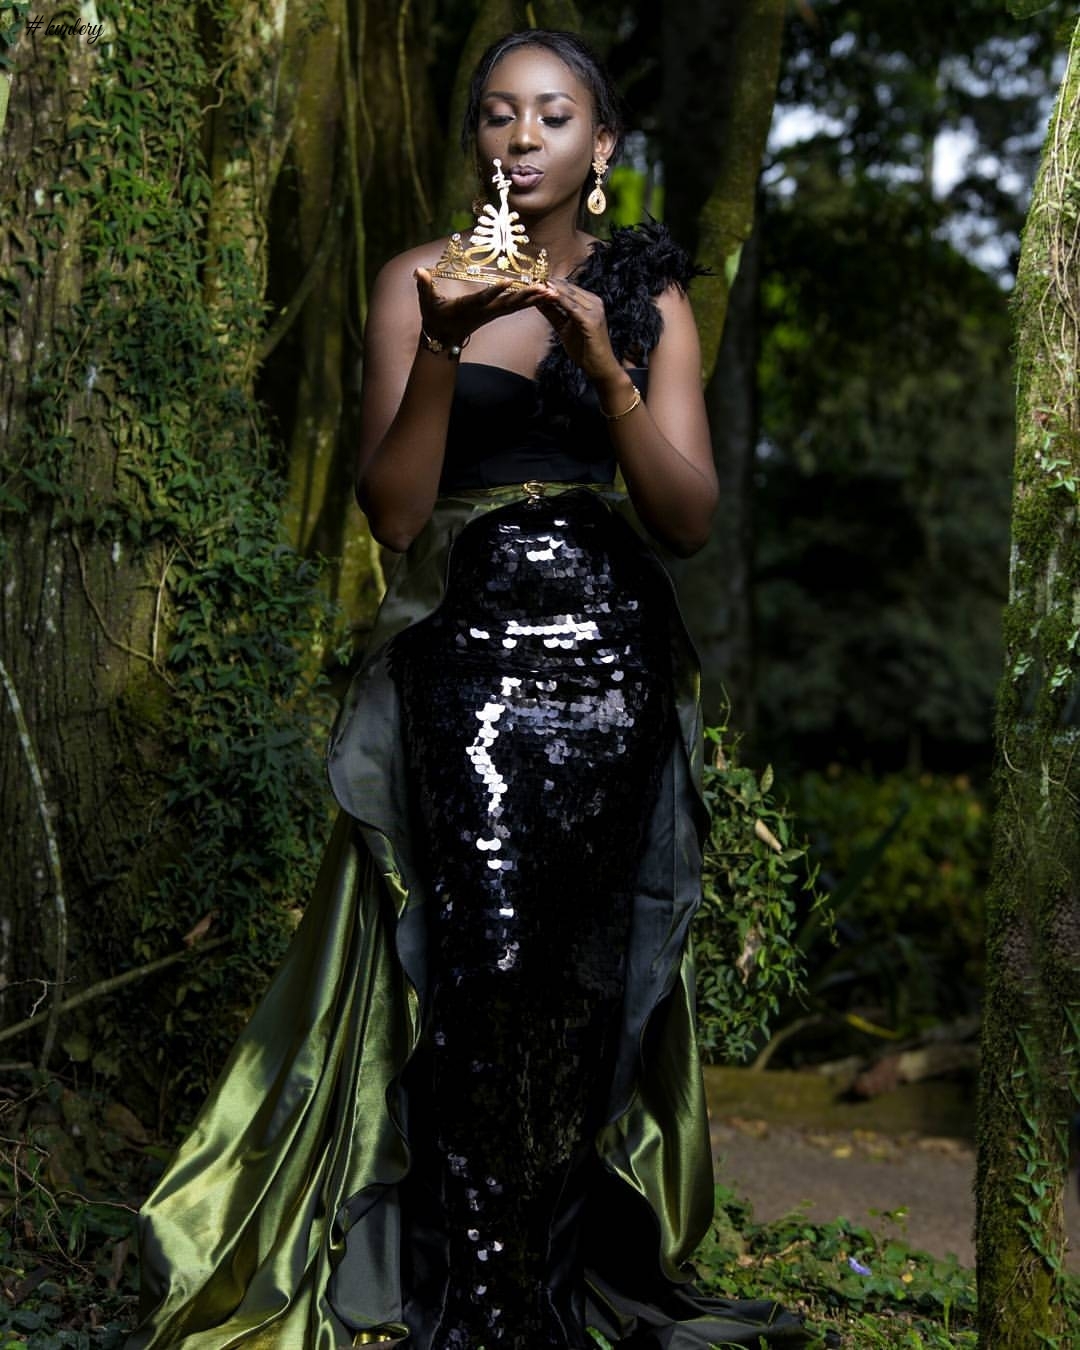 Miss Malaika Stuns In New Editorial In Elegant Sequined Dress As The Reigning Queen